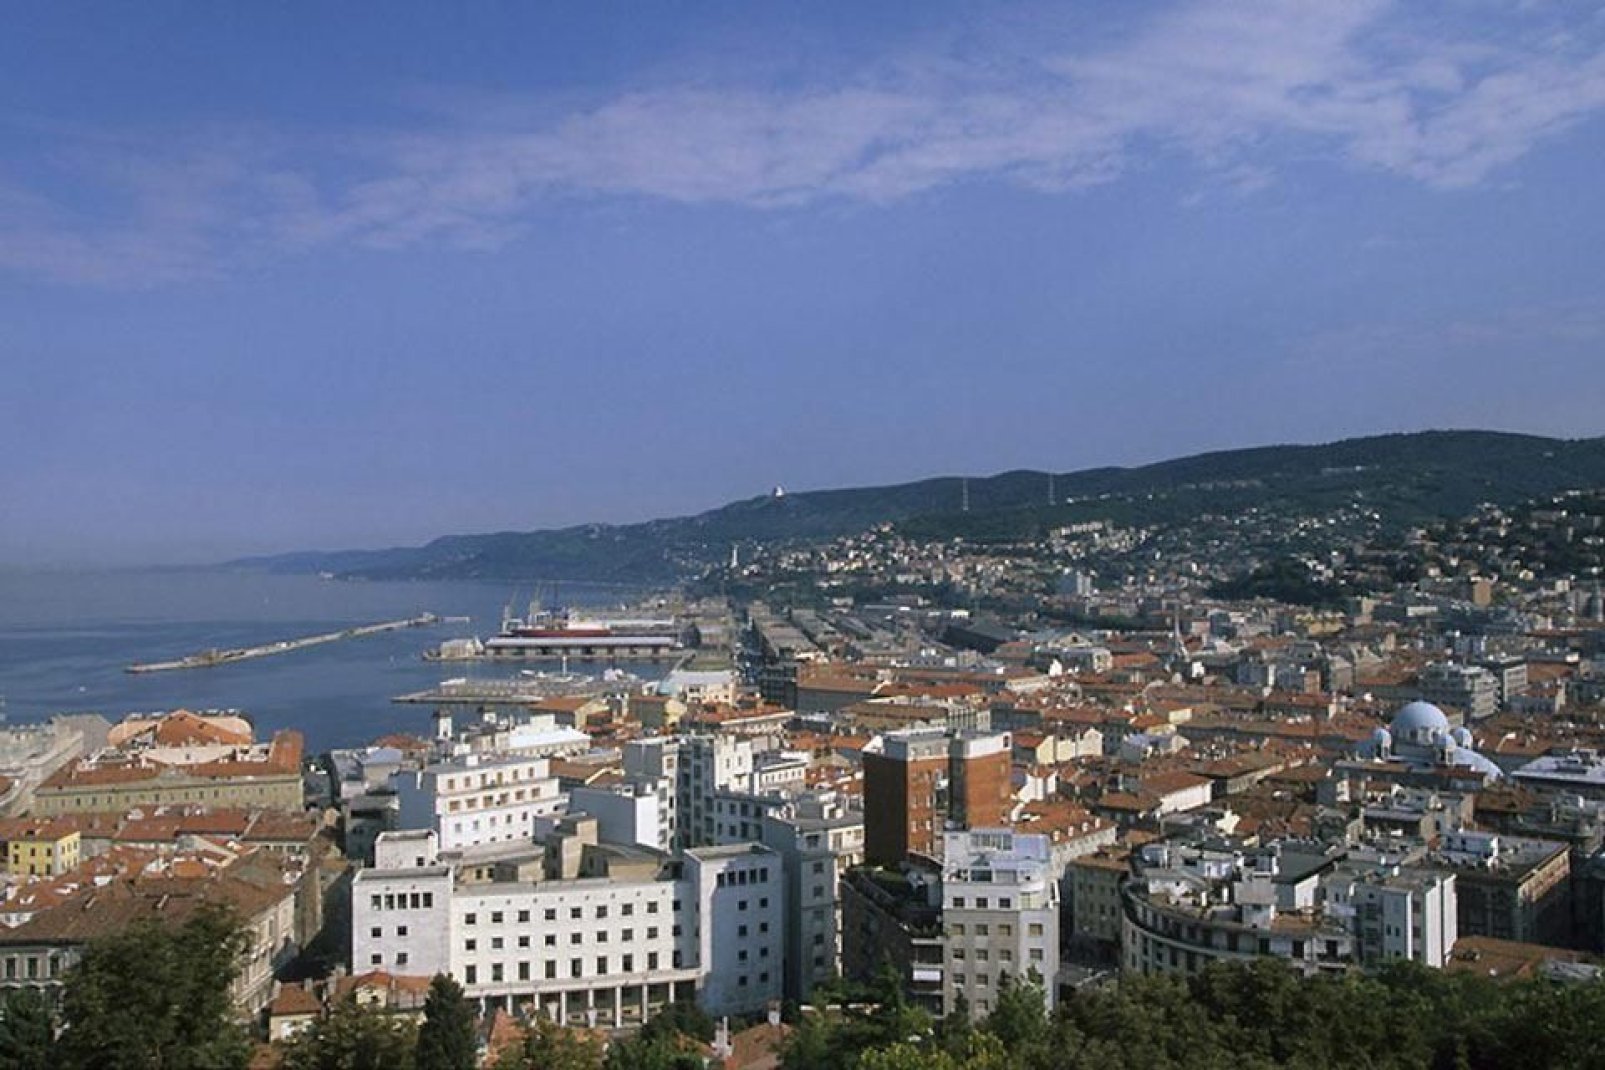 A maritime city, Trieste had one of the biggest ports during the period of the Habsburg empire.